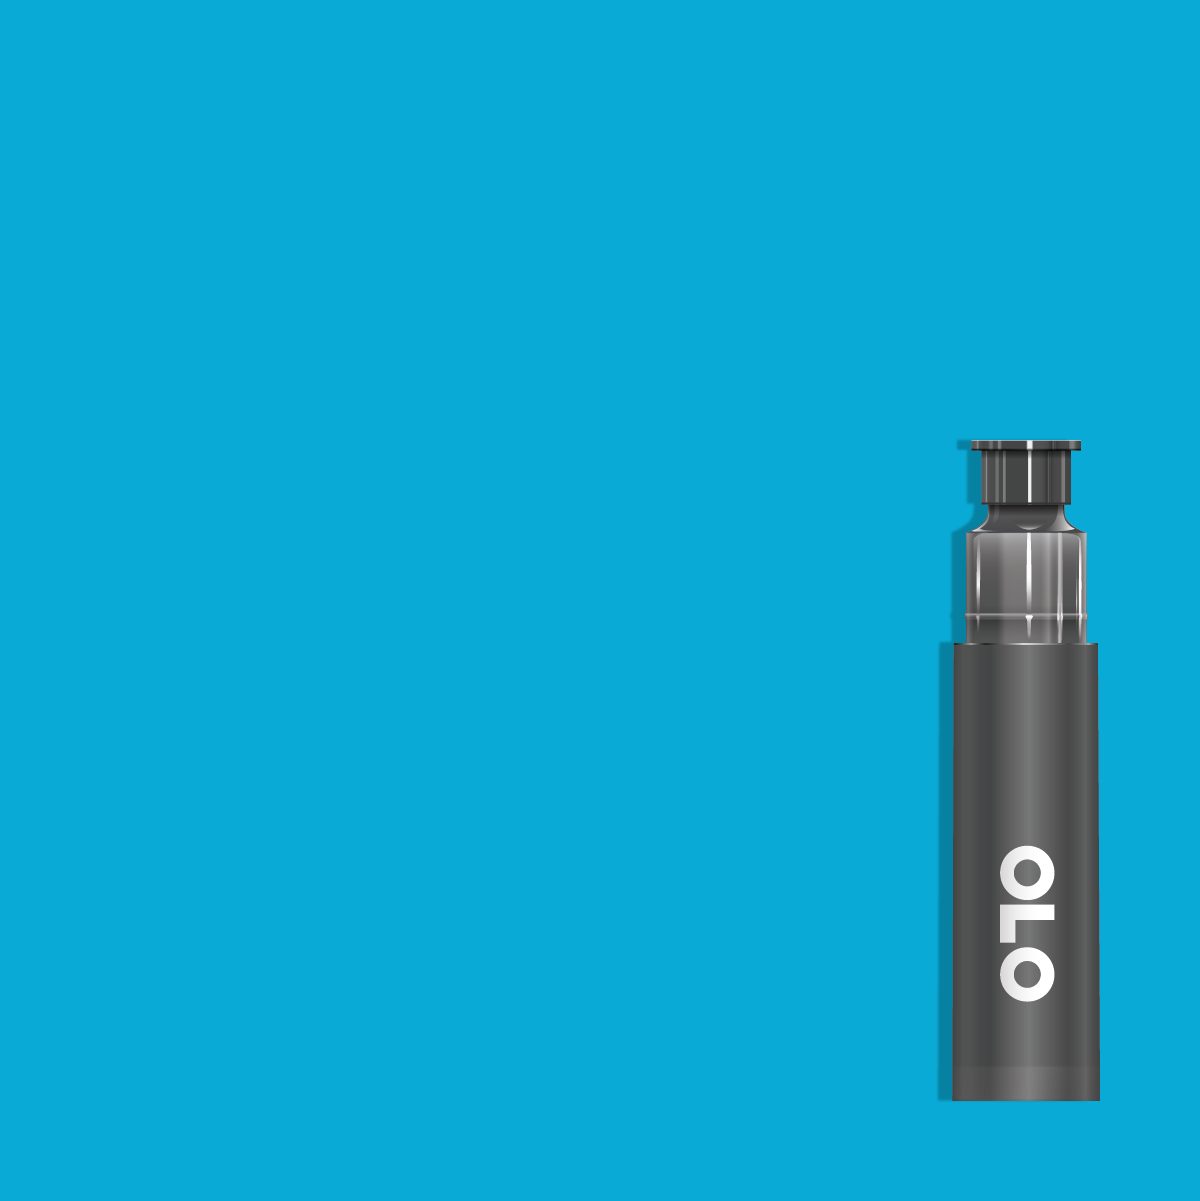 OLO BG0.4 Turquoise Replacement Cartridge